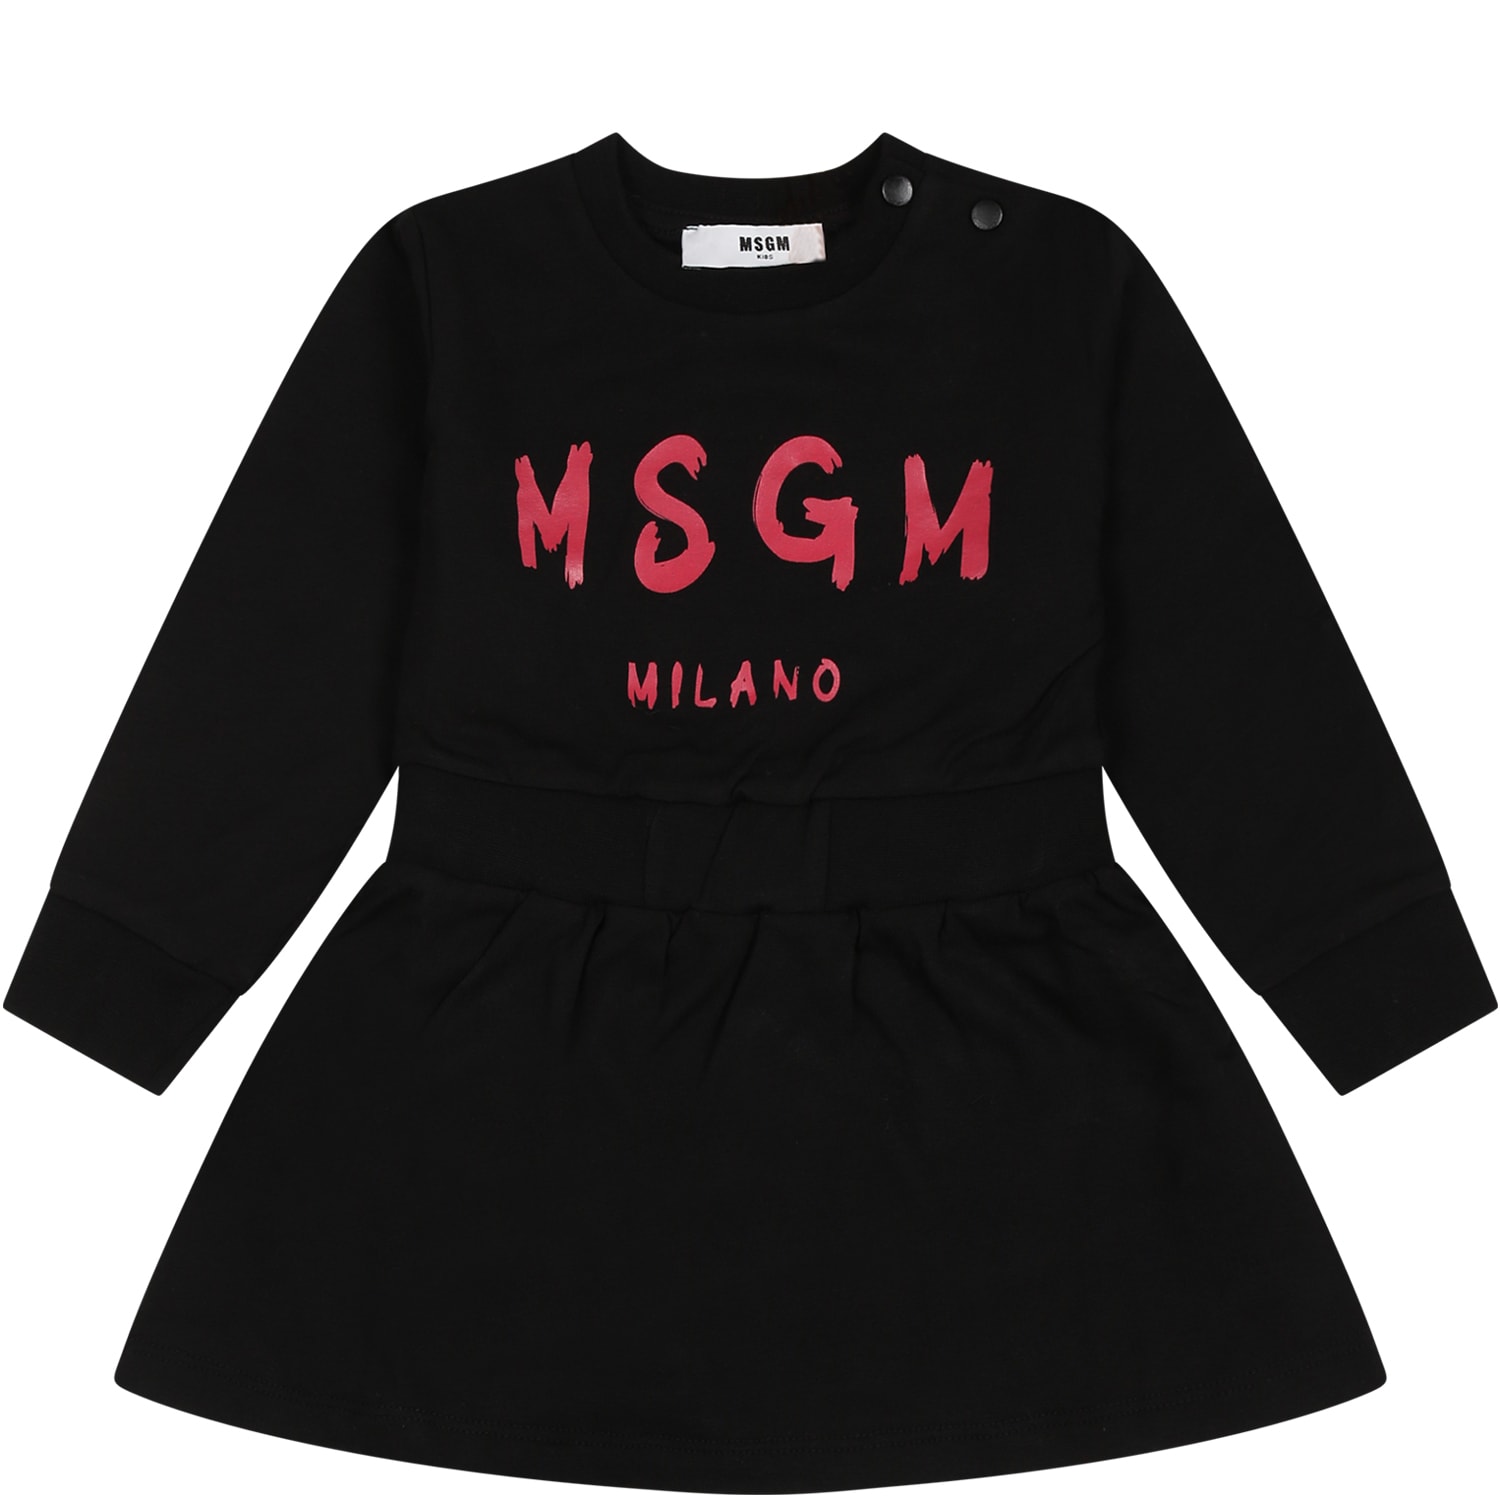 MSGM BLACK DRESS FOR BABY GIRL WITH LOGO